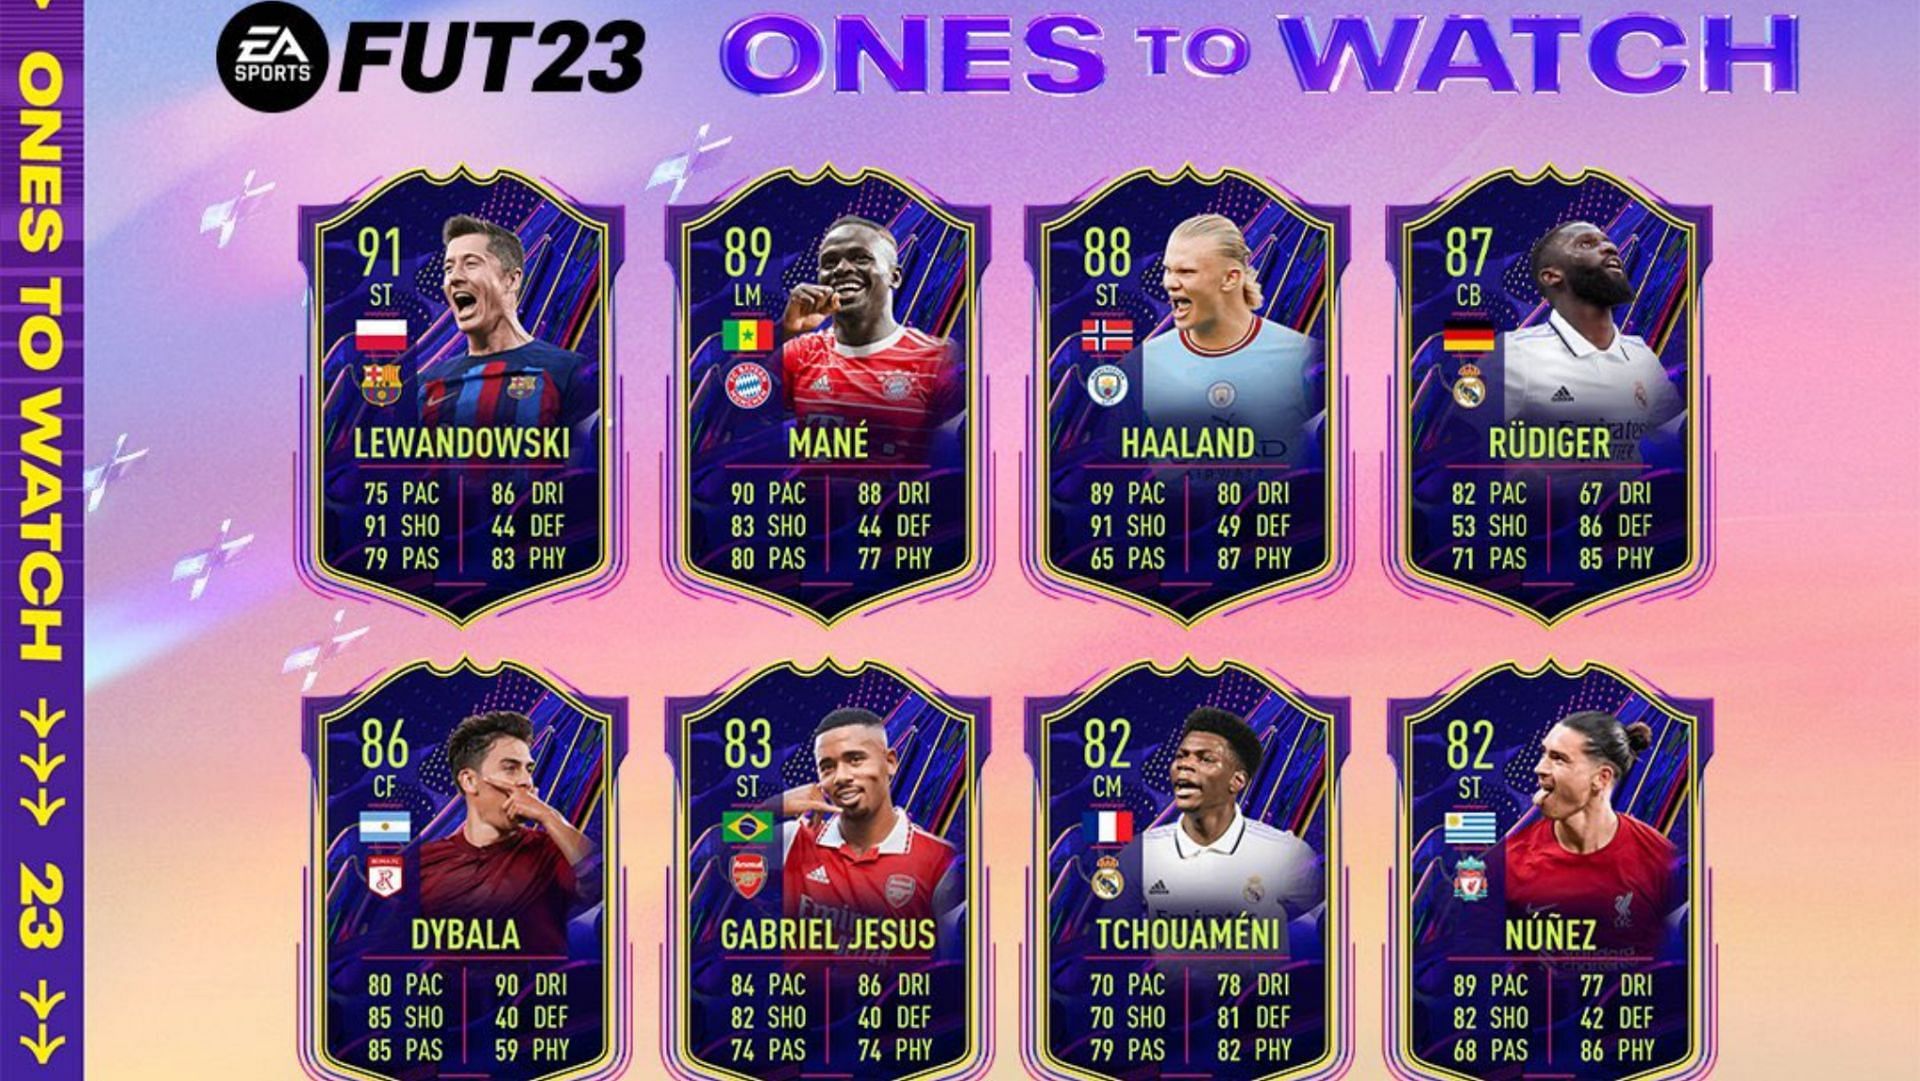 The Ones To Watch promo is live in FIFA 23 (Image via EA Sports)